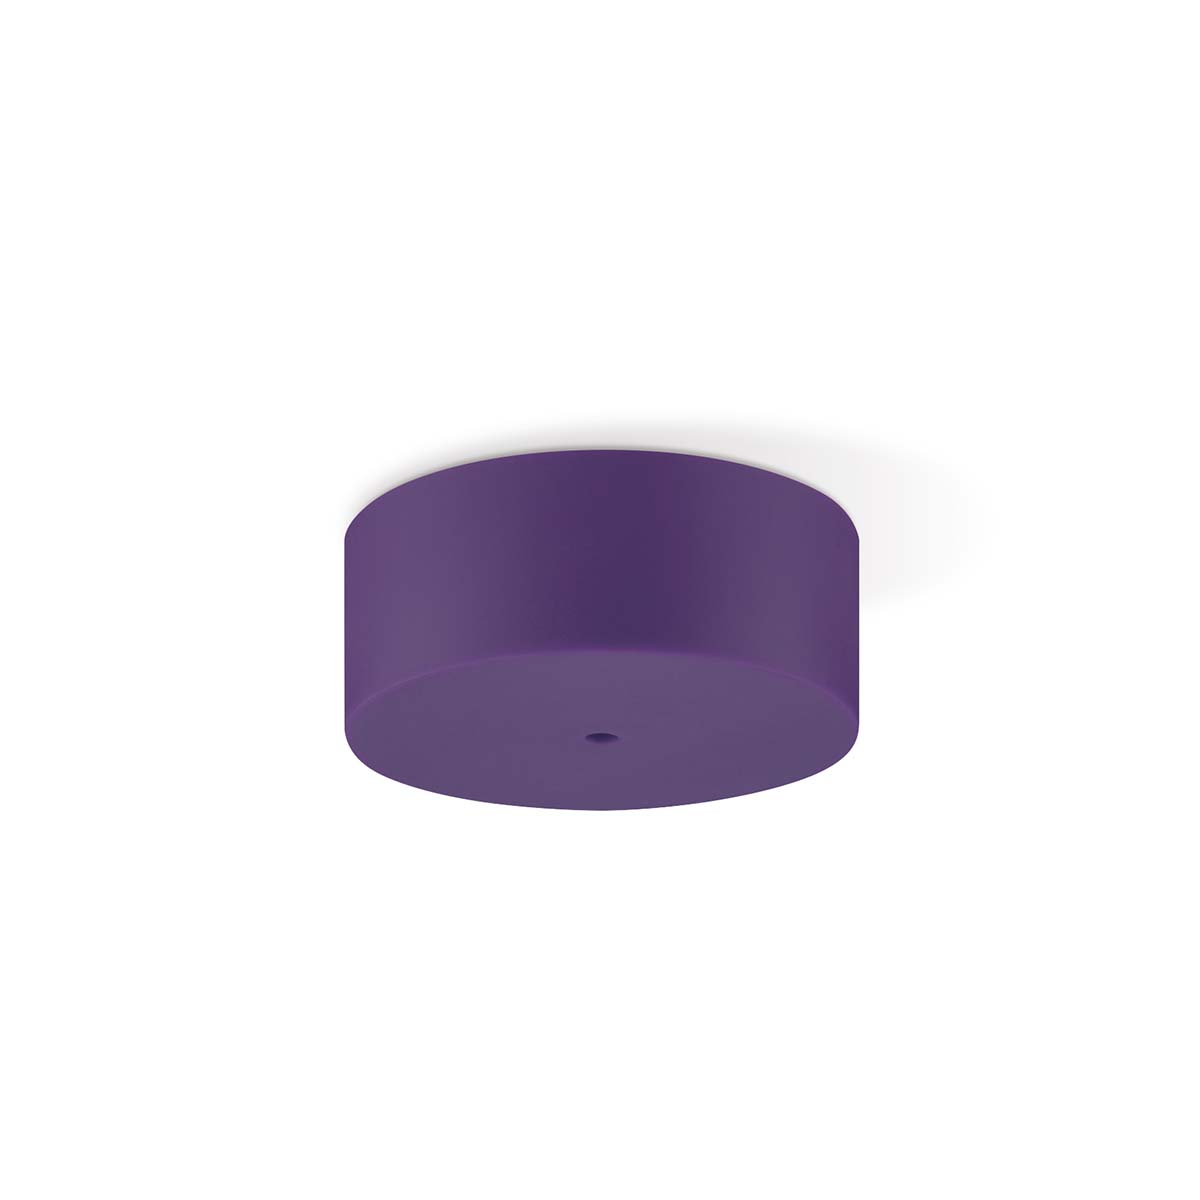 Tangla lighting - TLCP022-01PP - Silicon 1 Light round canopy cylinder - purple